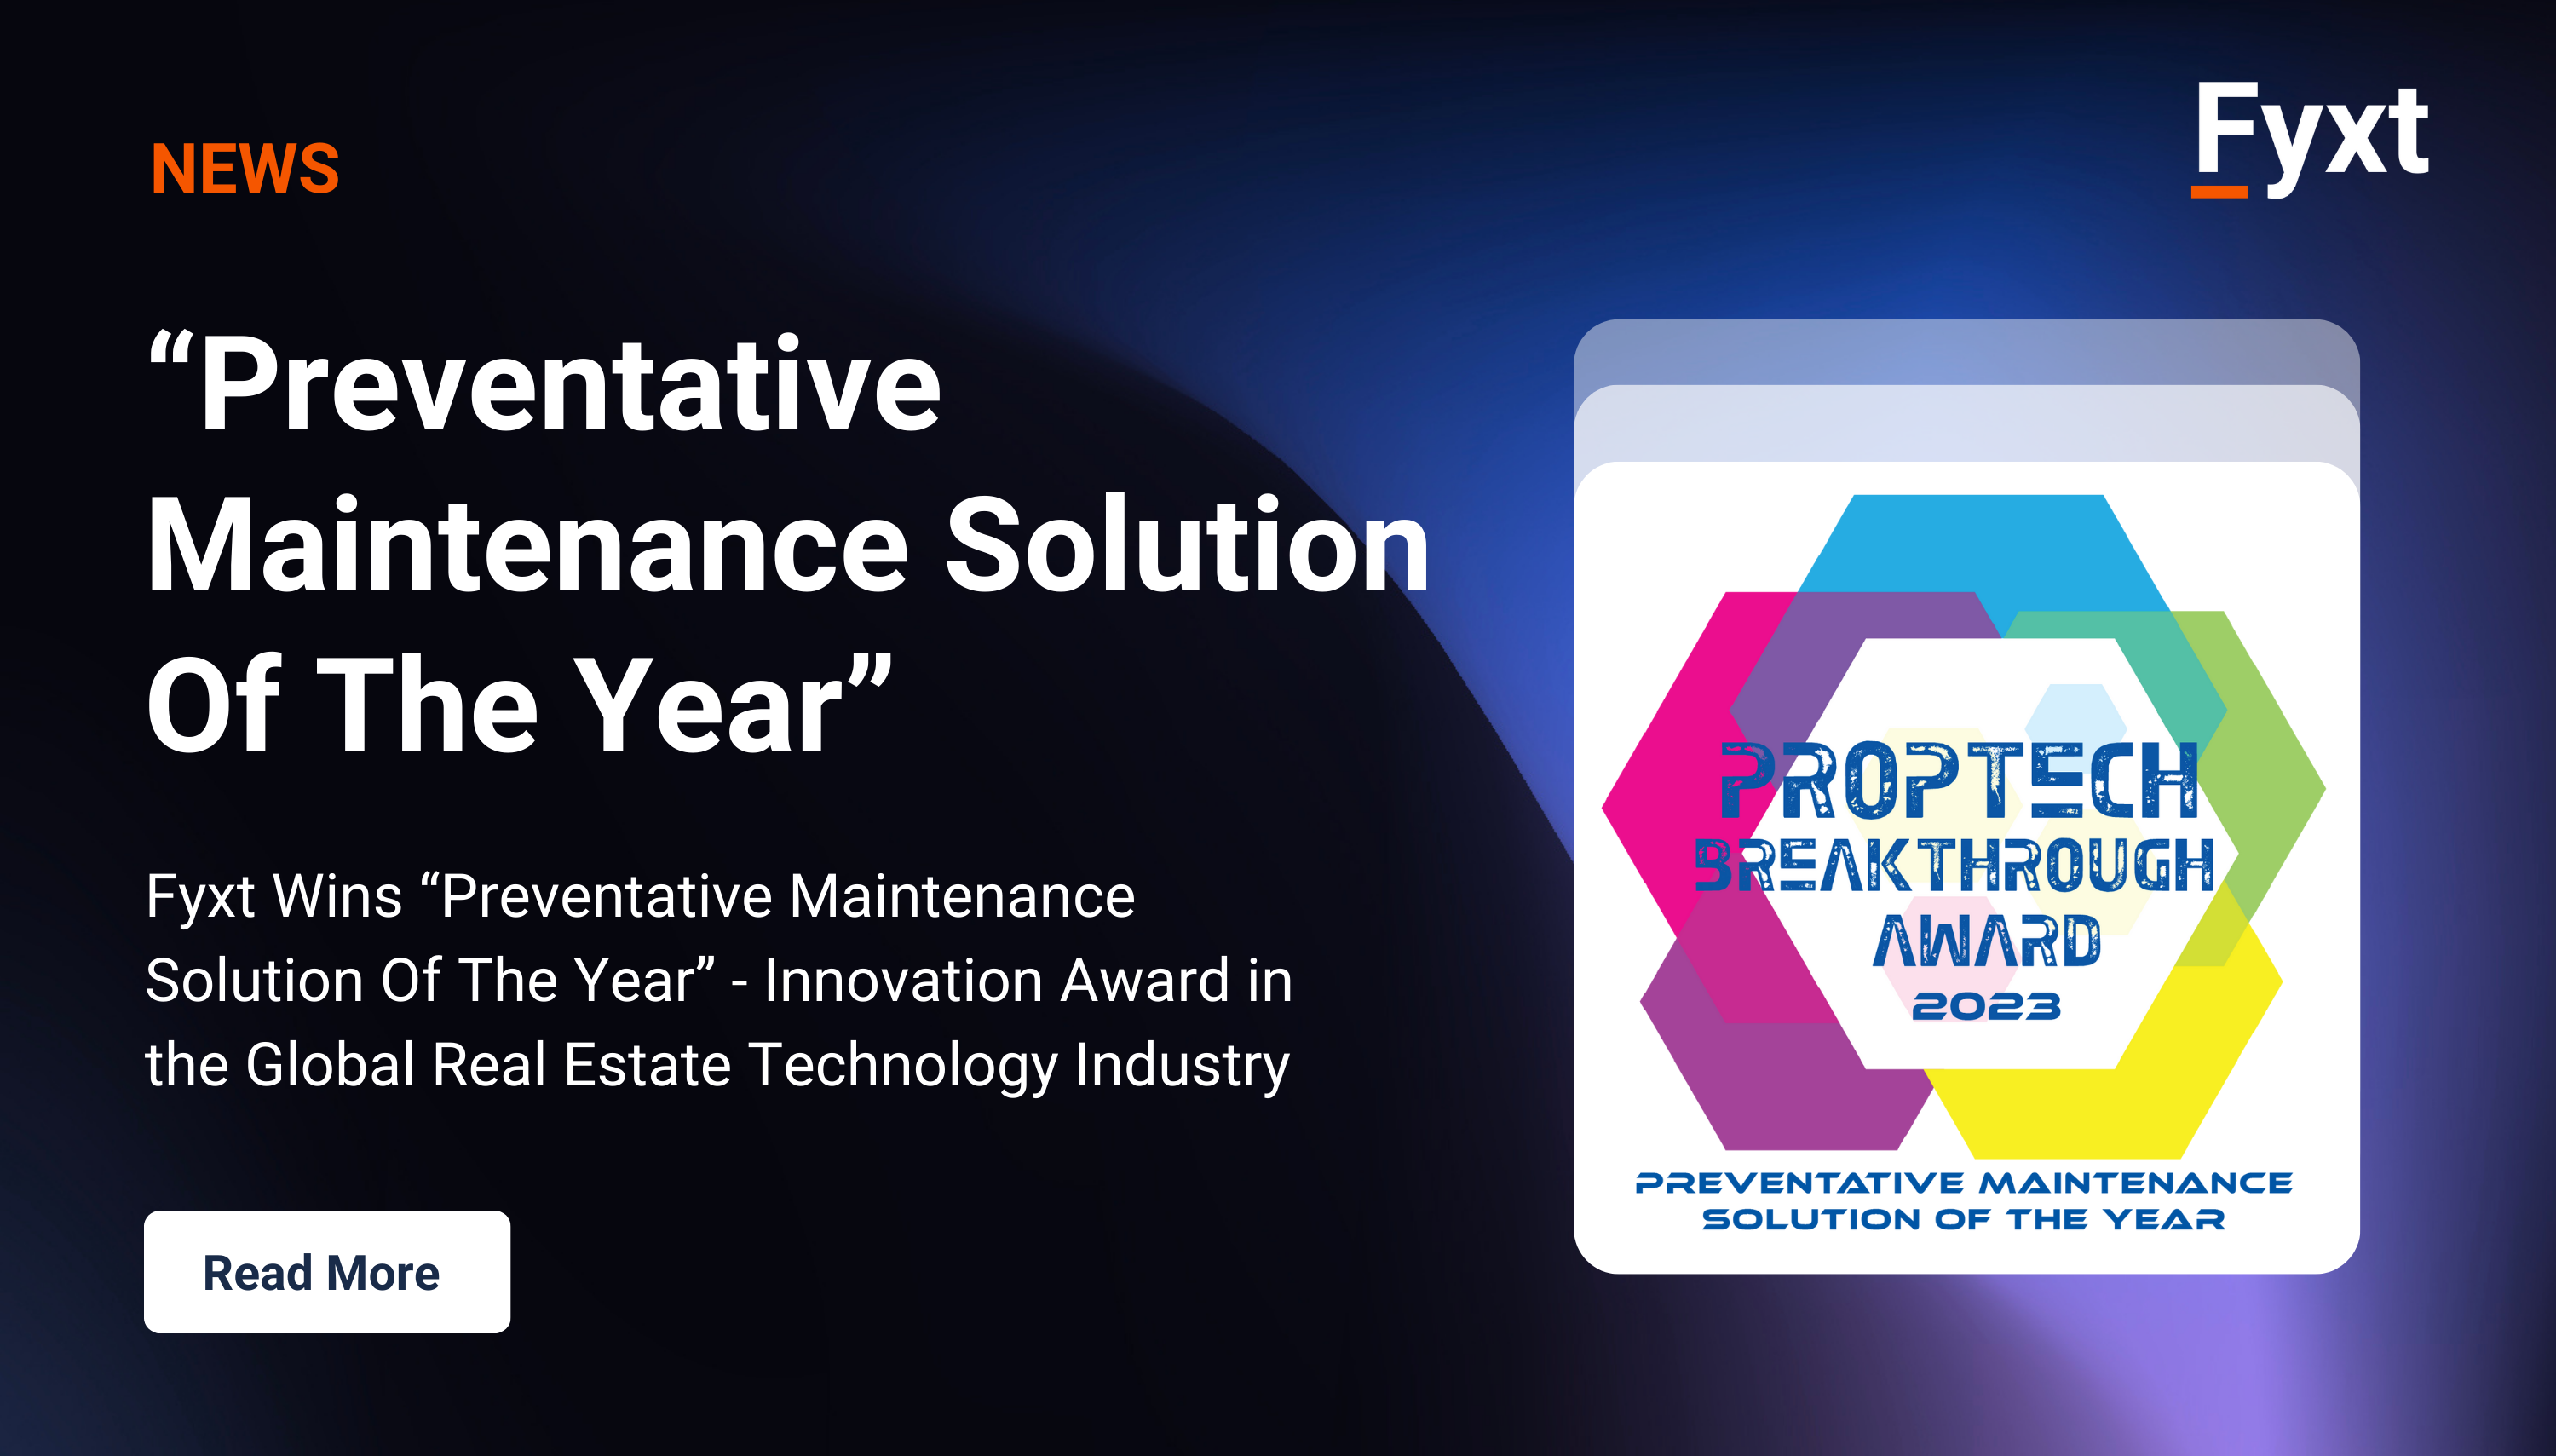 Fyxt Wins “Preventative Maintenance Solution Of The Year” Award From PropTech Breakthrough